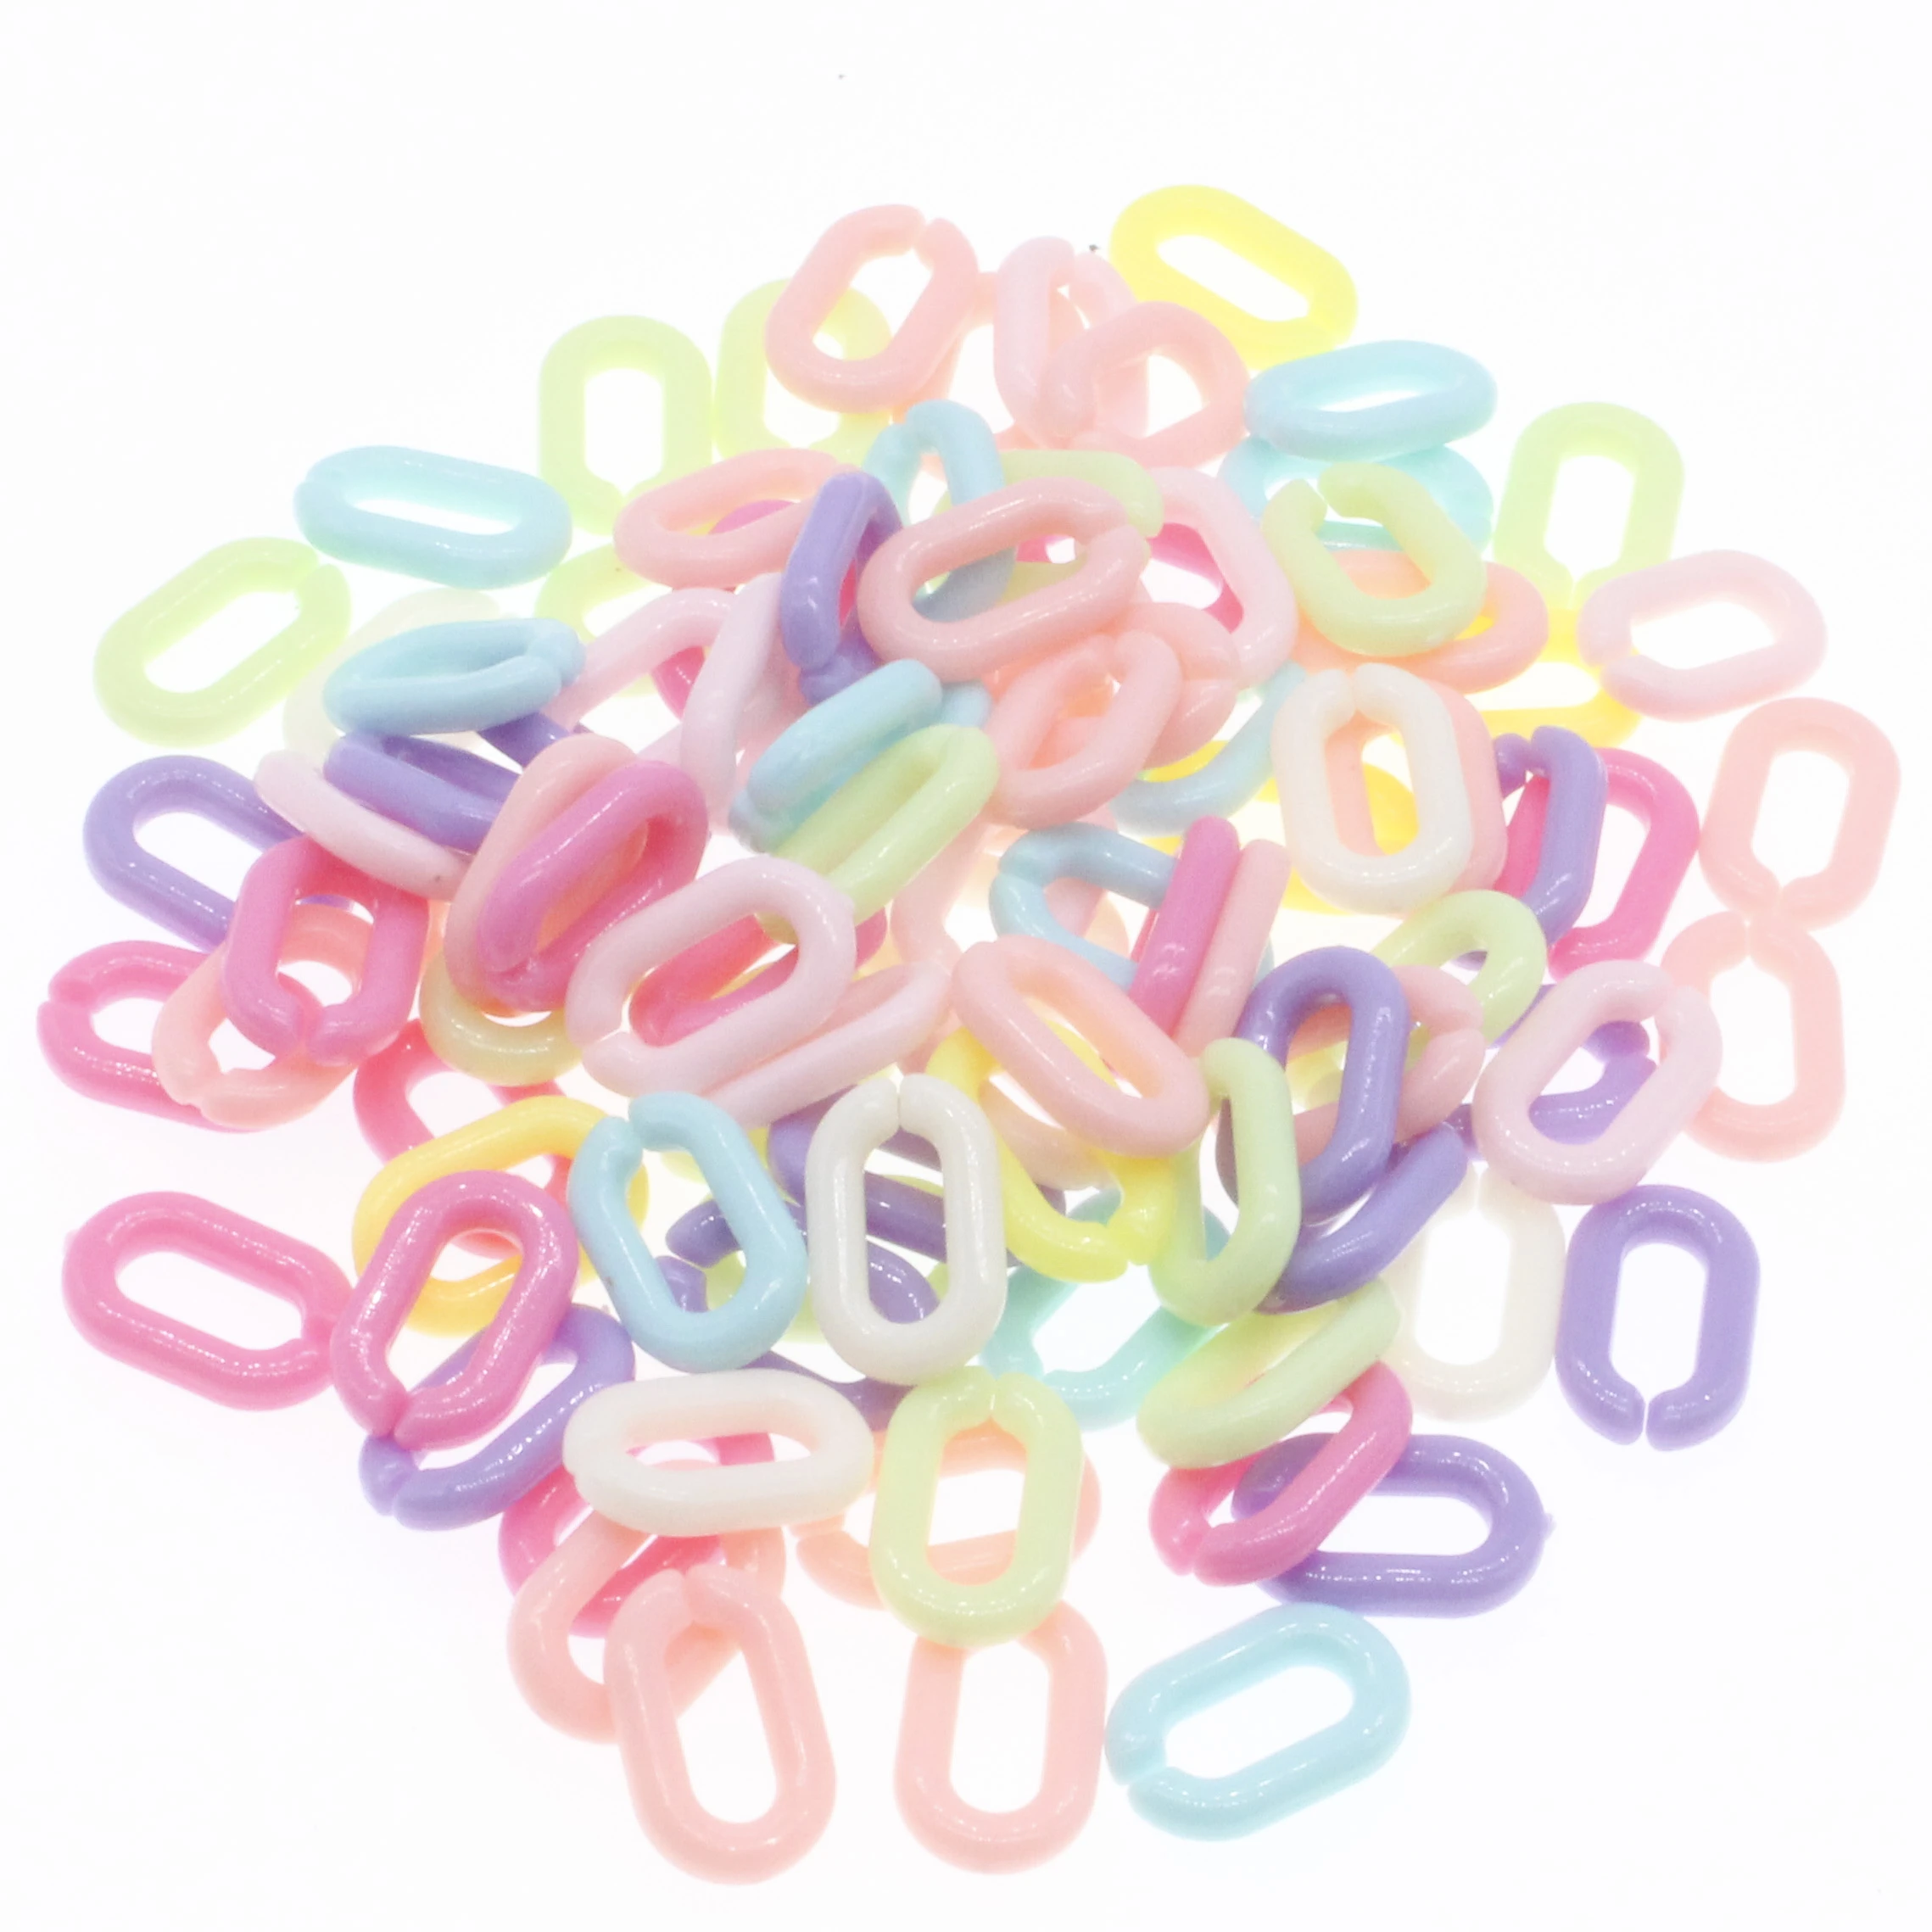 CHONGAI 200Pcs Acrylic Candy Colors Chain Links DIY Charm Accessories For Bag Decoration Jewelry Making  Glasses Chain 15mm